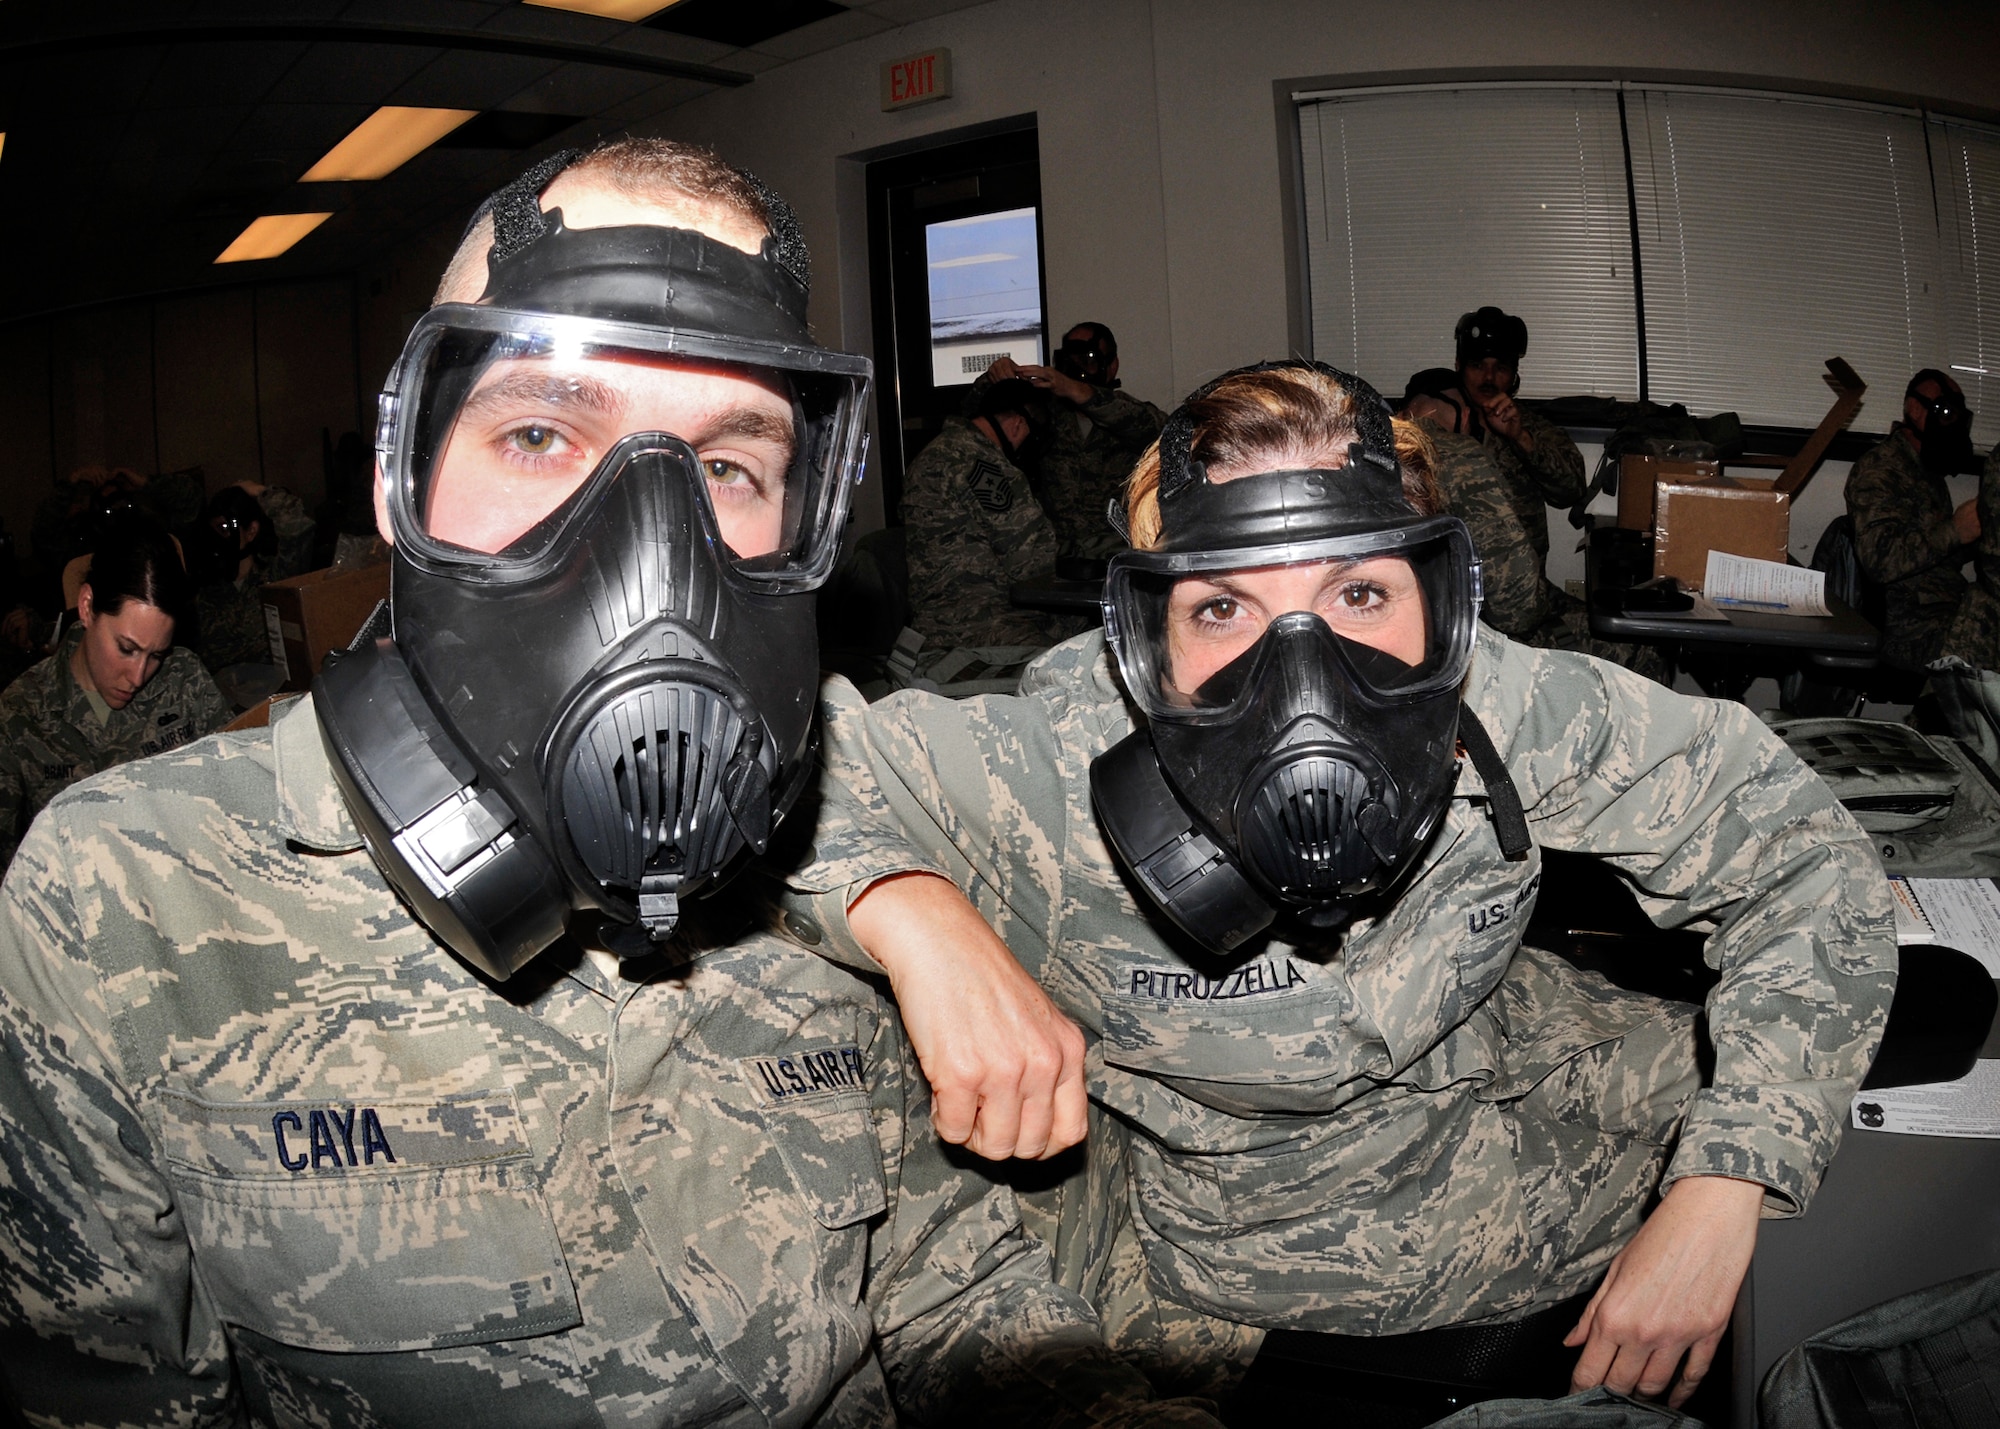 914th Airlift Wing members Maj. Andrea Pitruzzella (right) and Senior Airman Andrew Caya being issued and trained in the basics of the new M50 Joint Service General Purpose Mask January 9 2011 Niagara Falls Air Reserve Station, Niagara Falls, NY. The M50 Joint Service General Purpose Mask will be the standard for the United States Armed Forces. (U.S. Air Force photo by Staff Sgt. Joseph McKee)